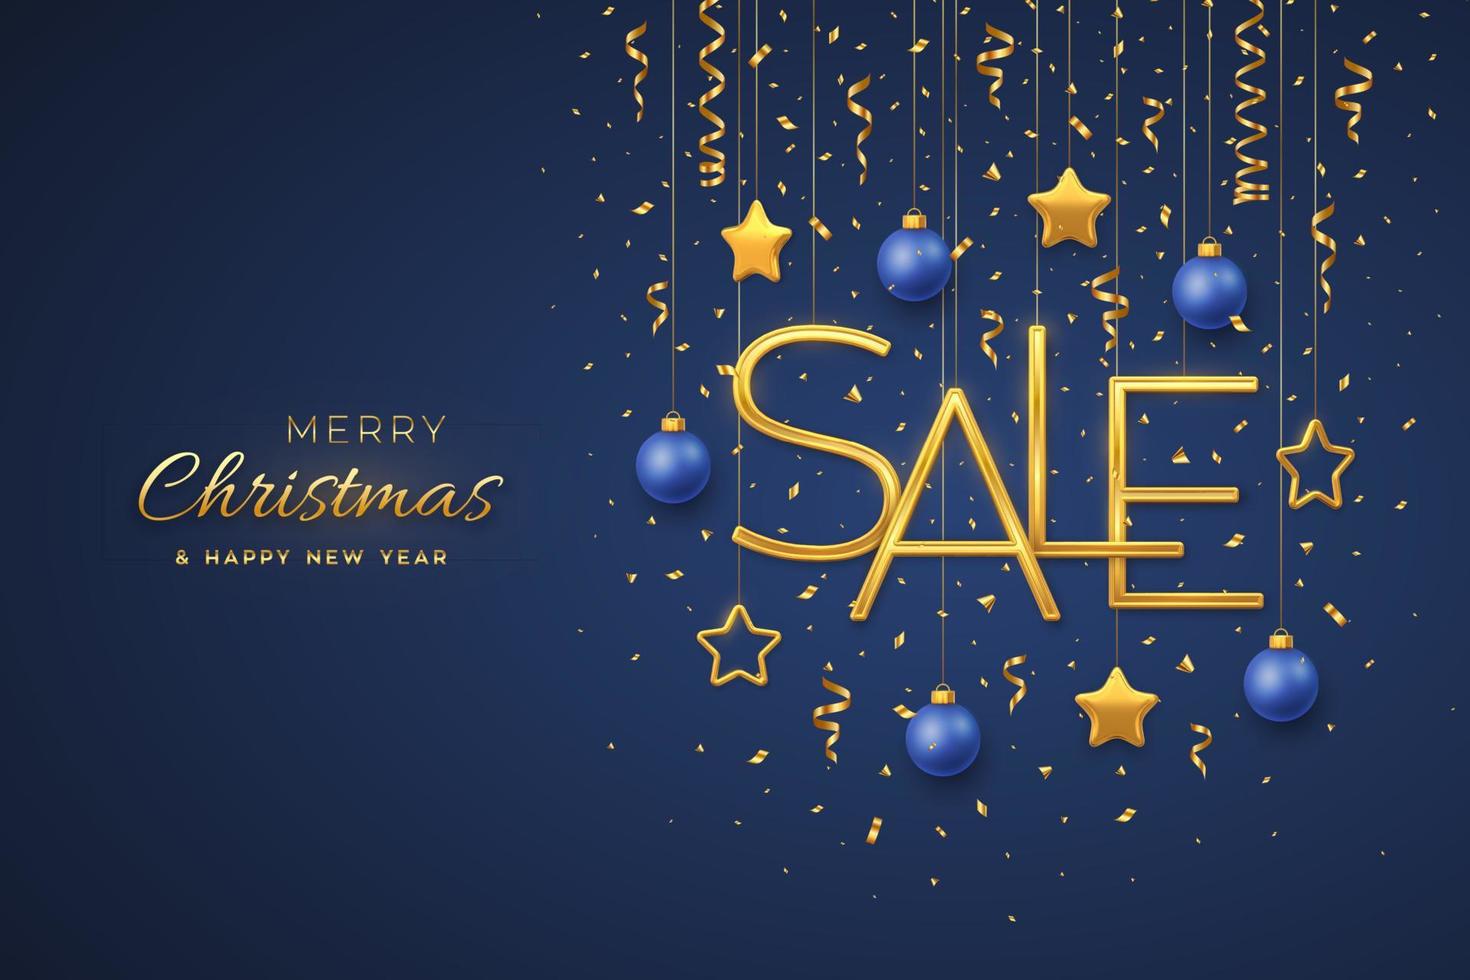 Christmas sale design banner template. Hanging Golden metallic Sale letters with 3D metallic stars, balls and confetti on blue background. Advertising poster or flyer. Realistic vector illustration.